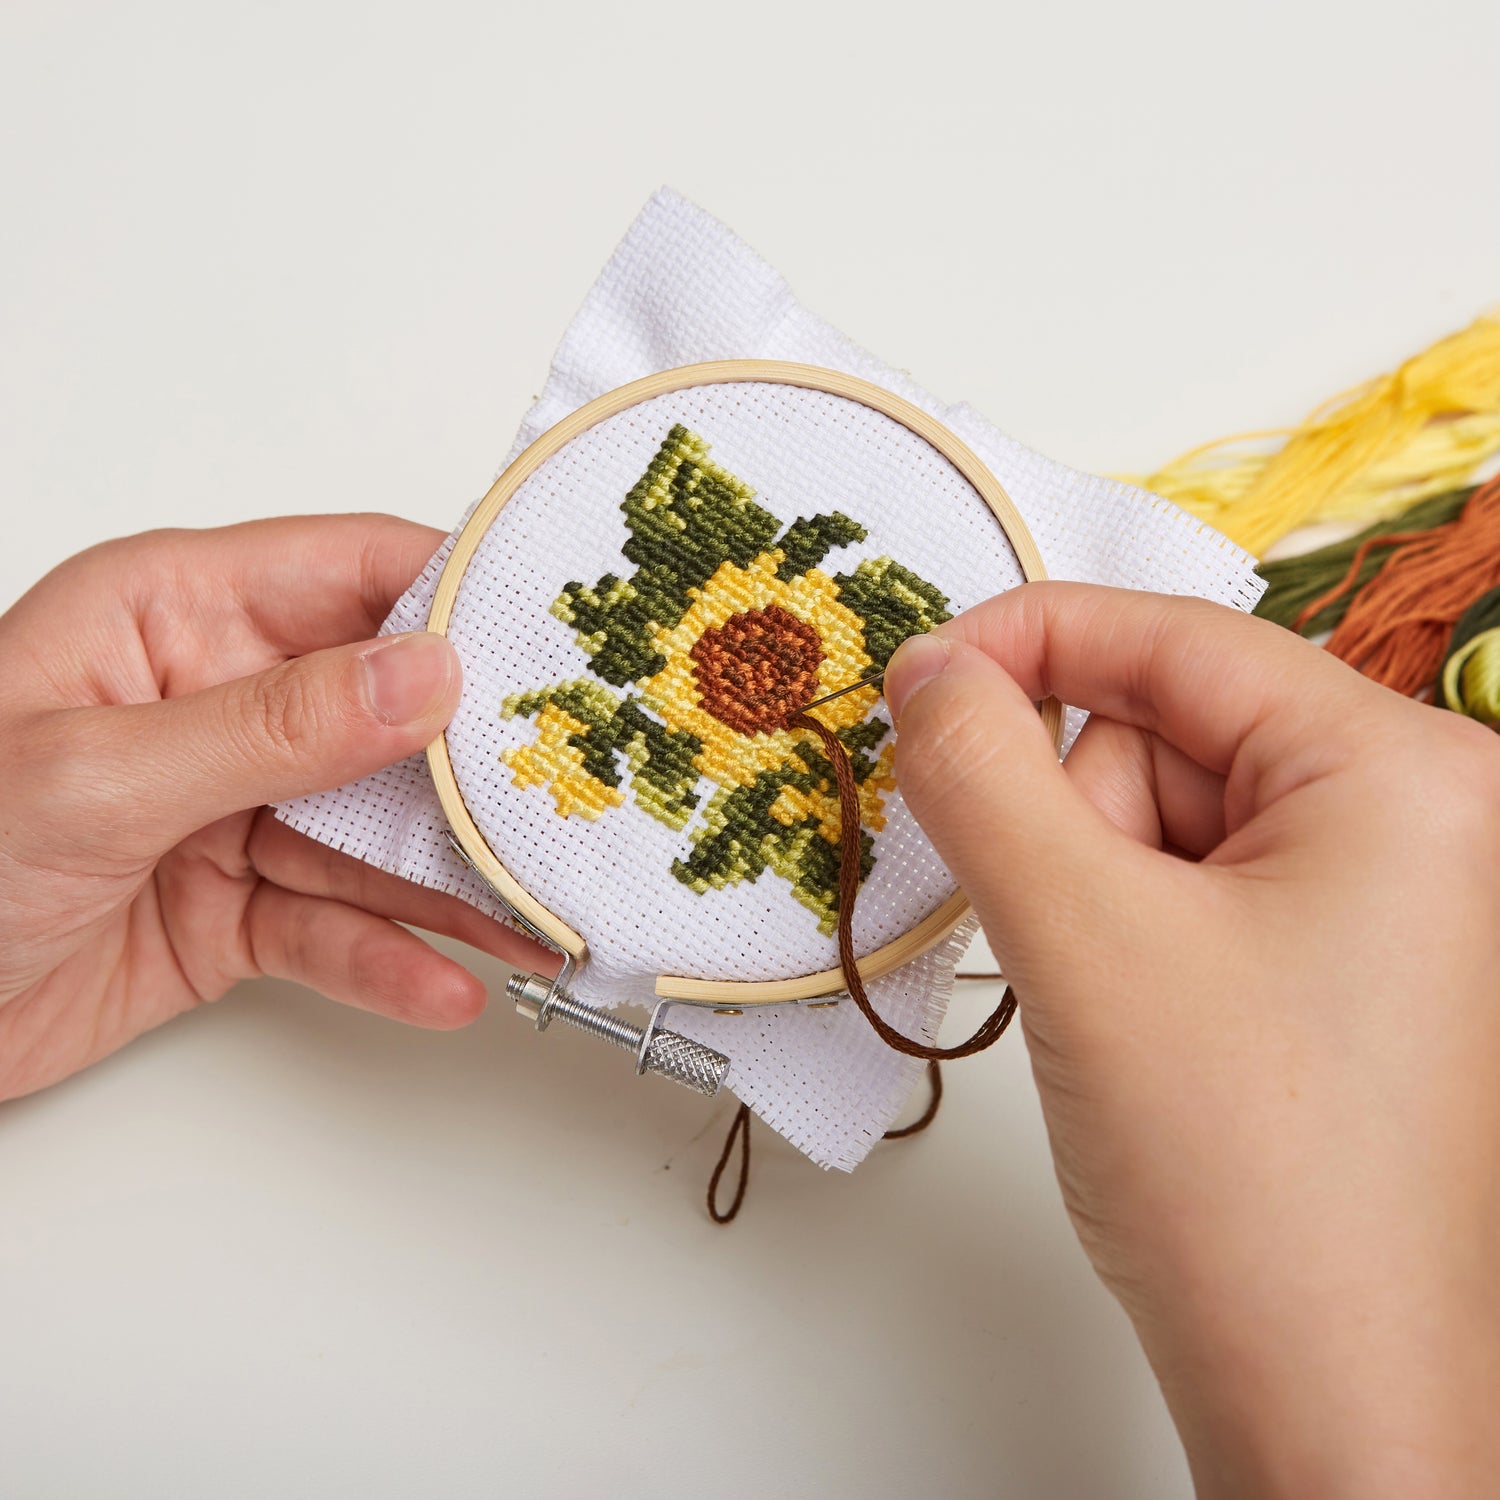 Embroidery Essentials: Craft Supplies to Make Hand Embroidery Easier and Fun